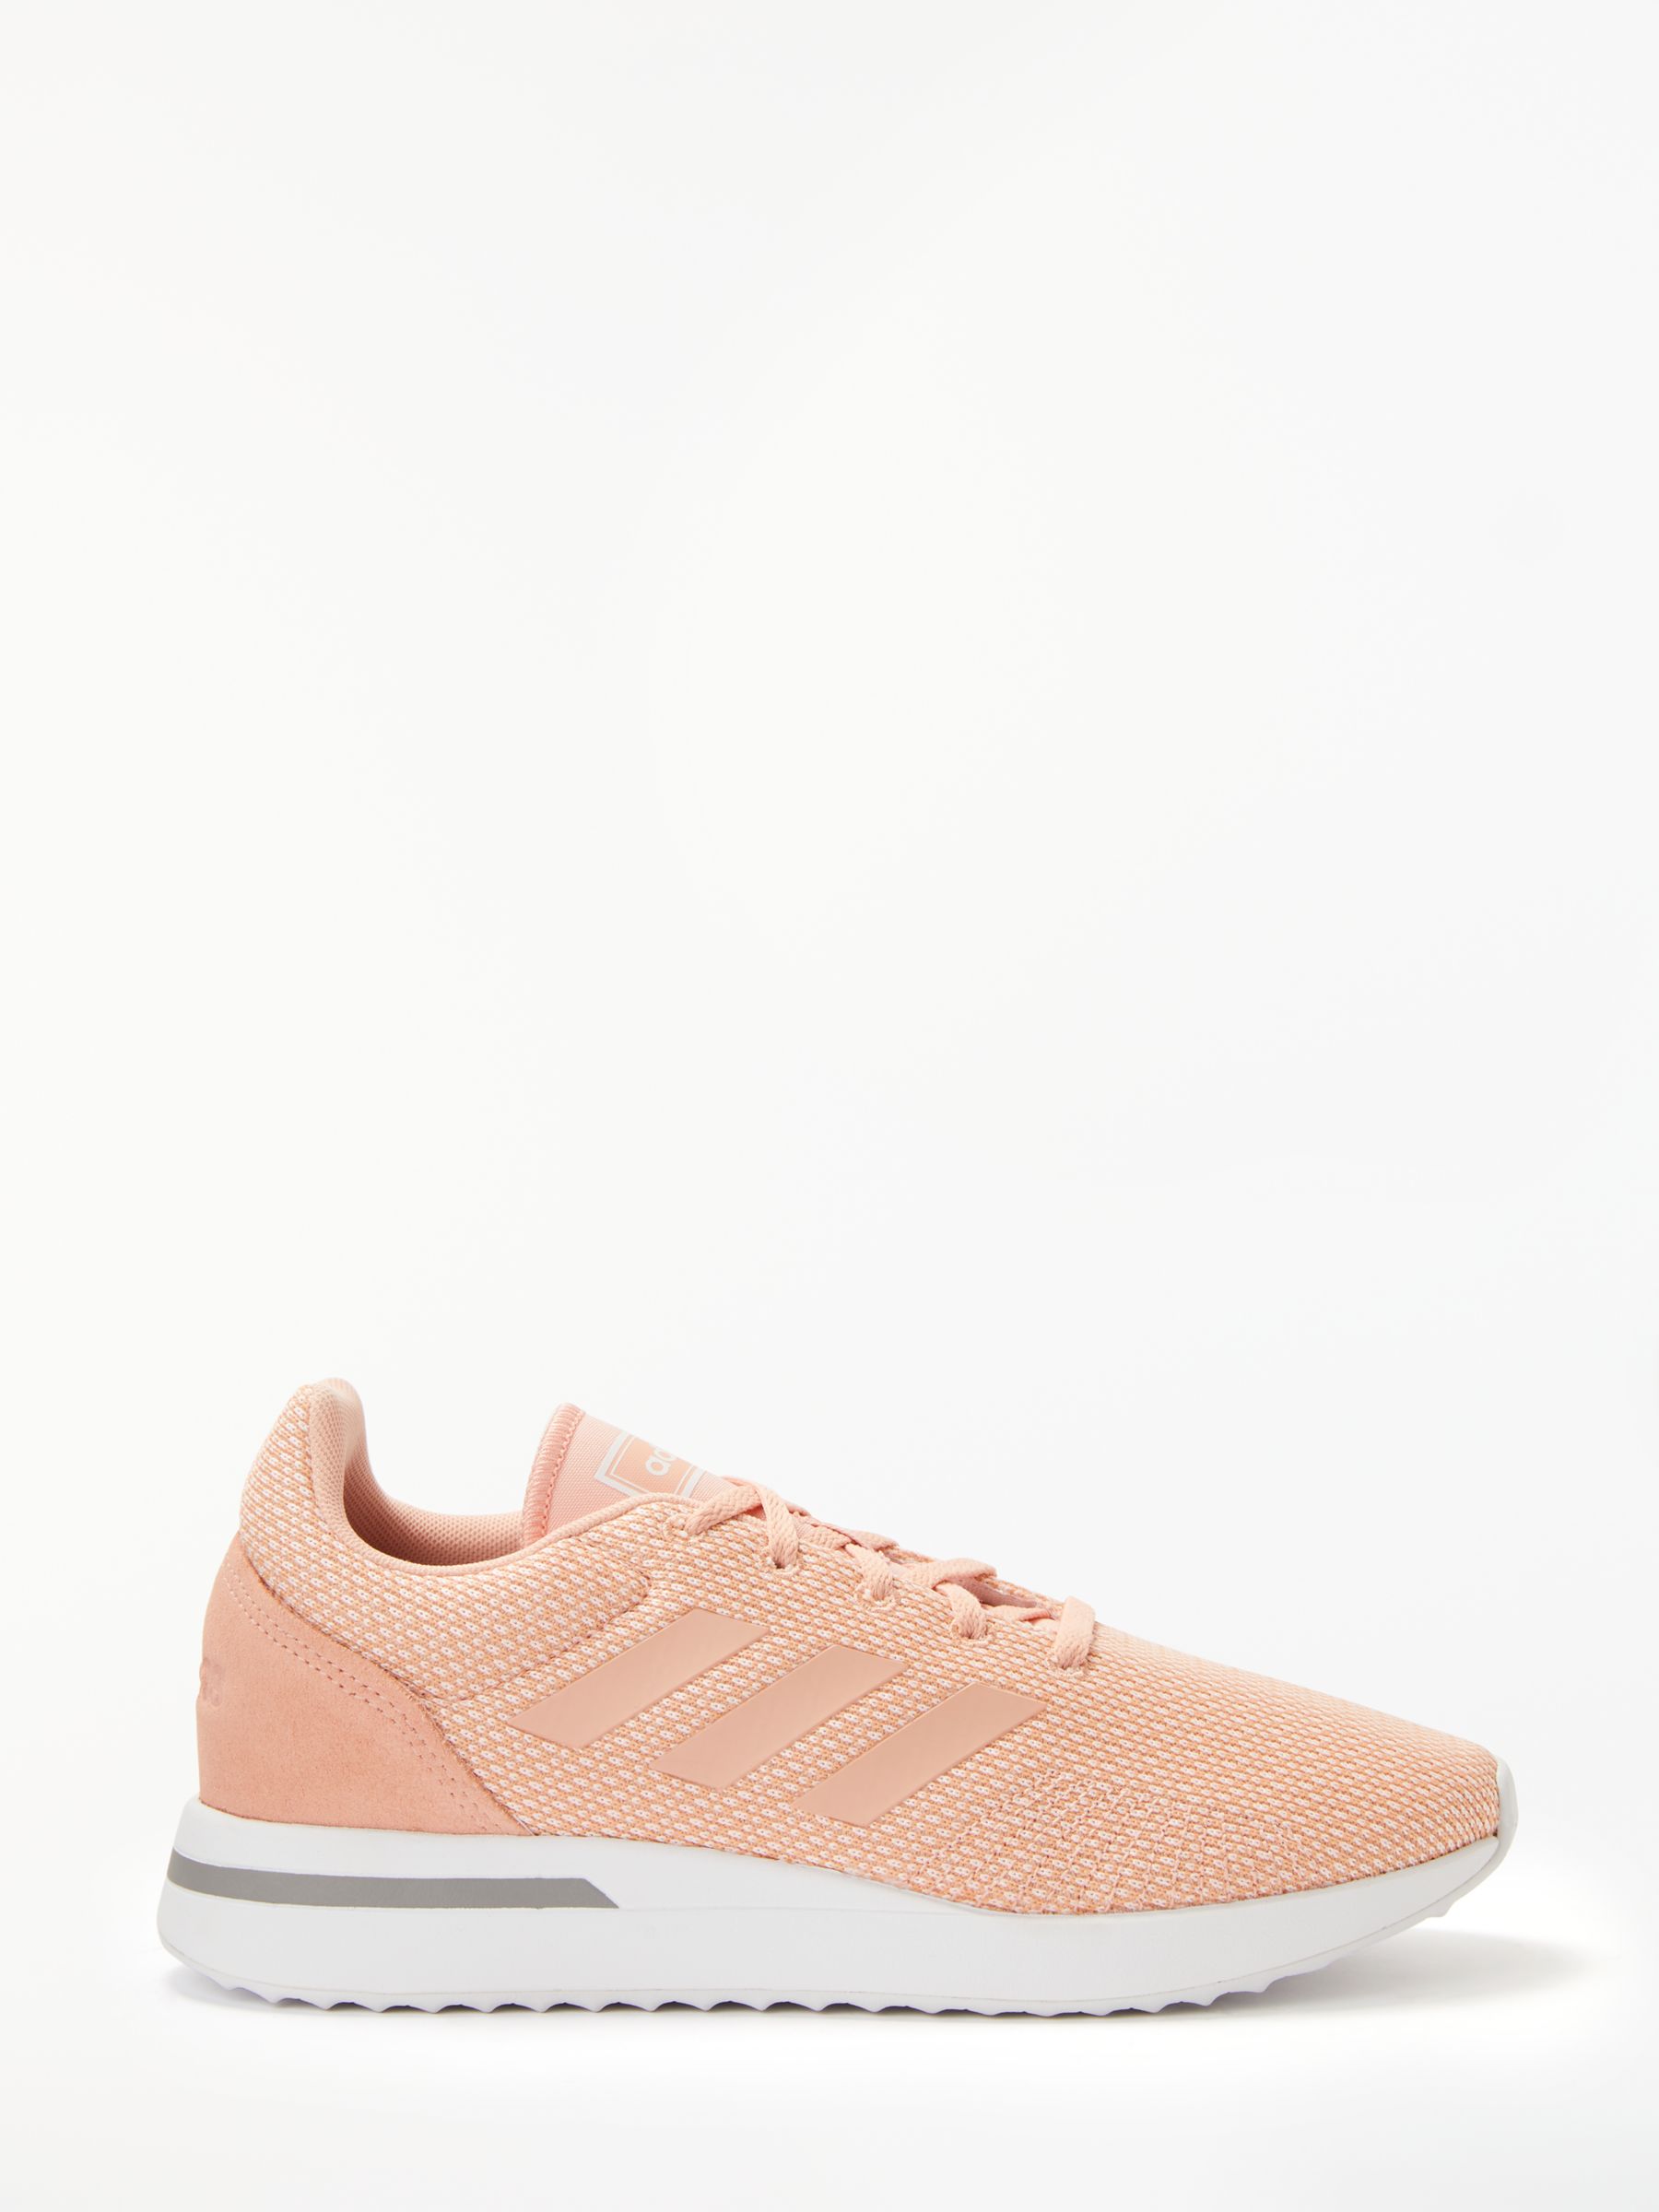 adidas Run 70s Women's Trainers, Clear 